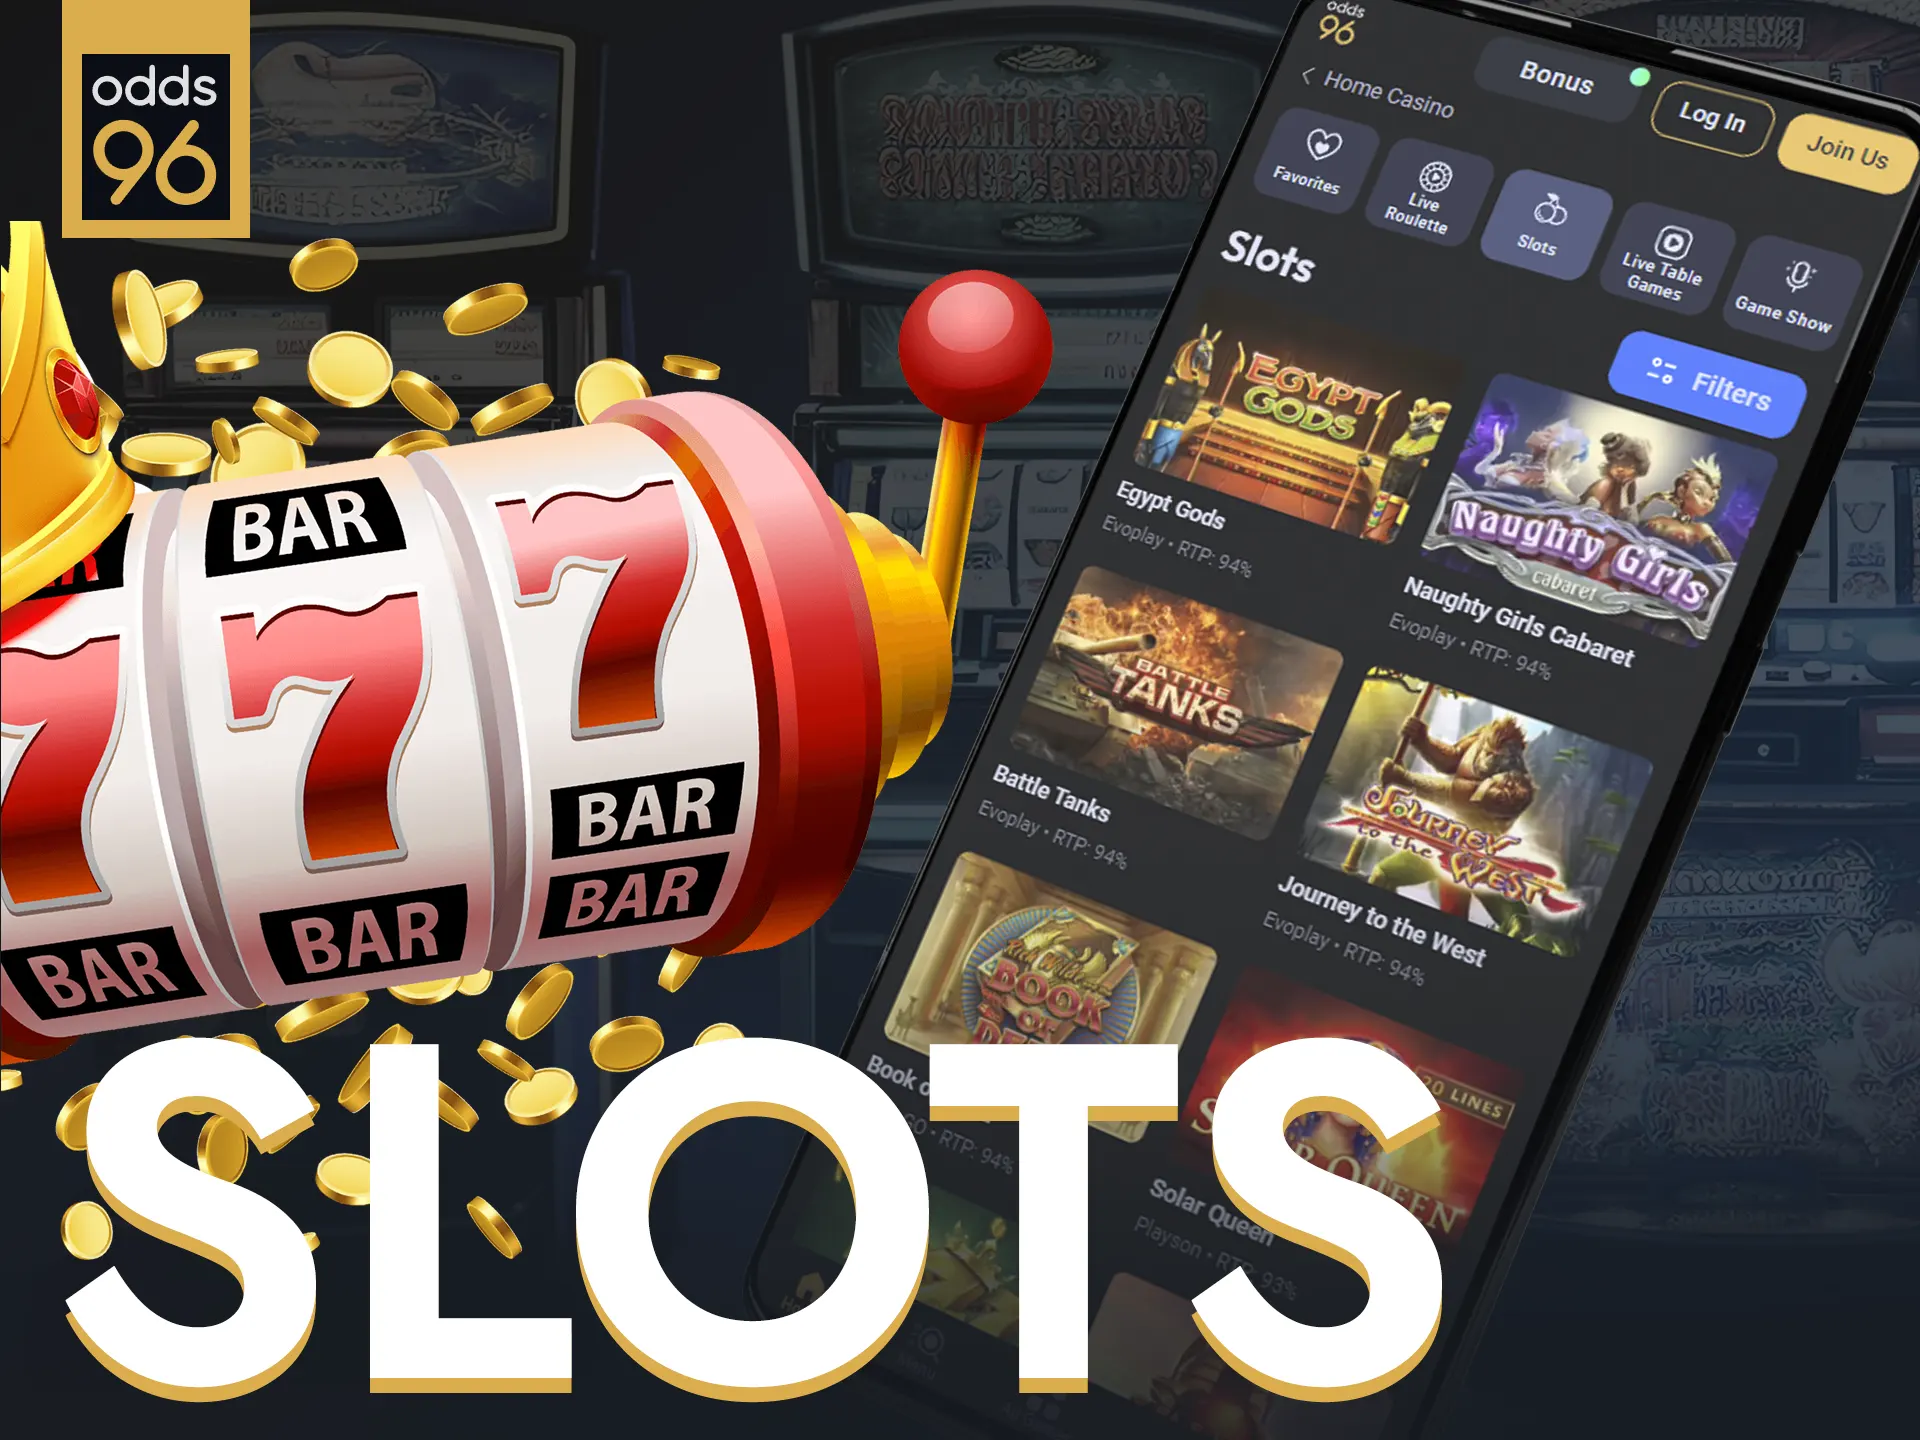 Discover diverse slot options on Odds96 app.